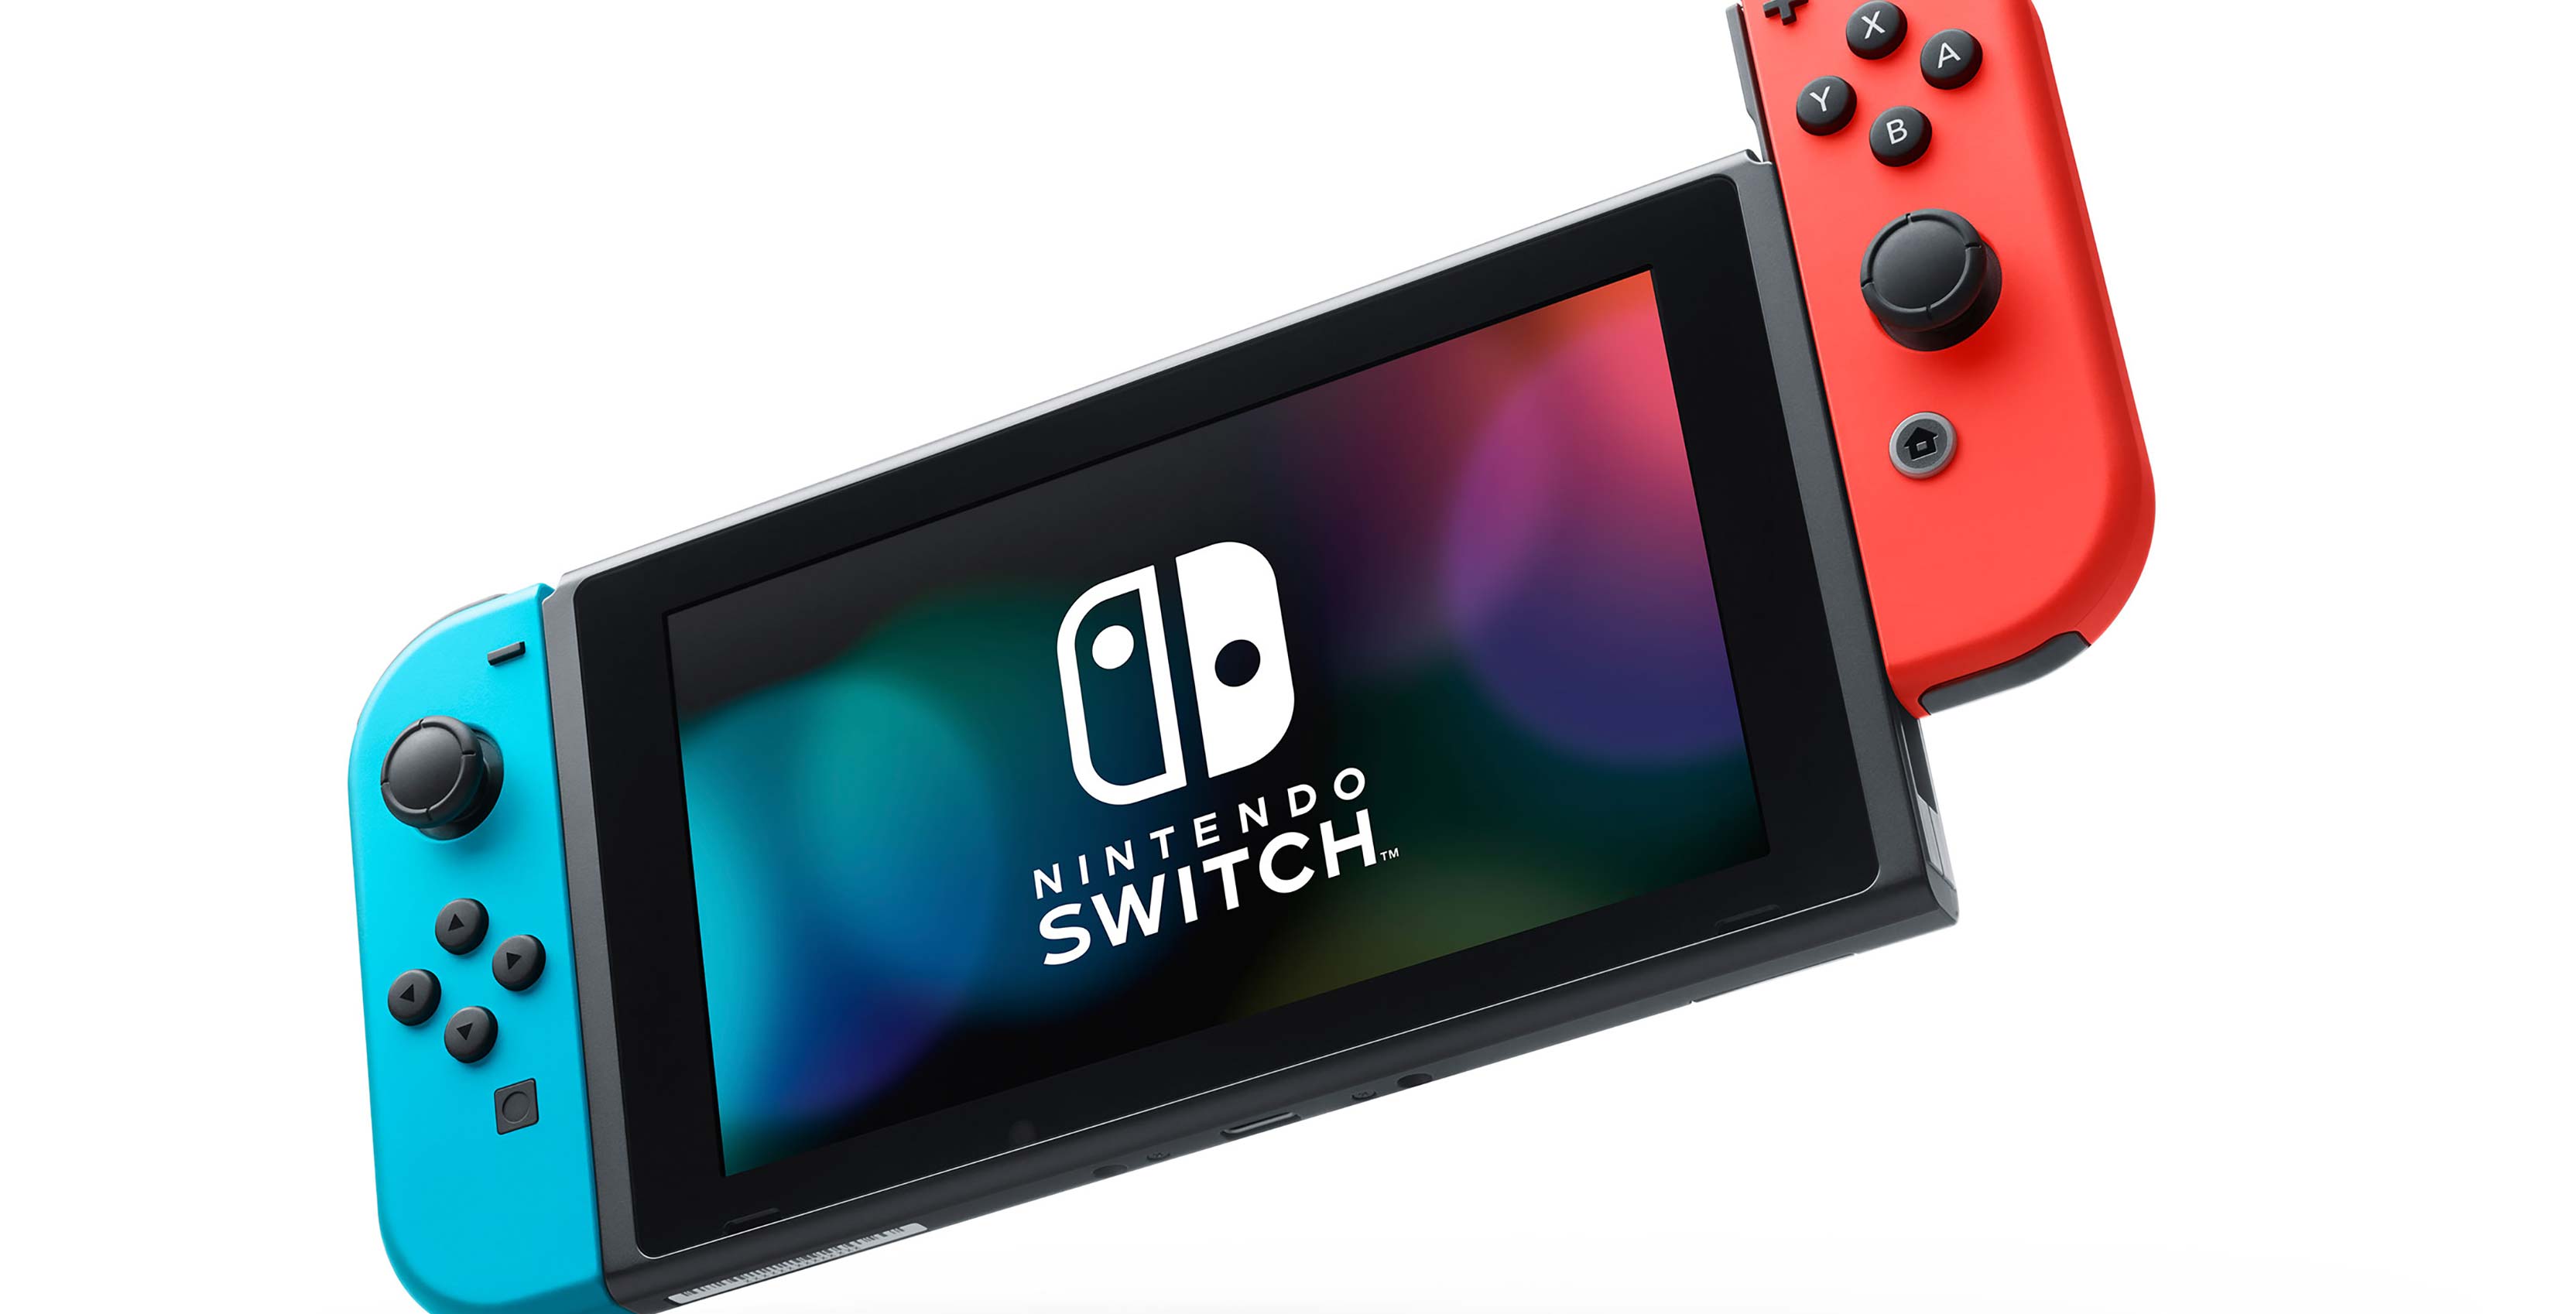 Nintendo Switch tablet and Joy-Cons - Nintendo Switch pre-orders